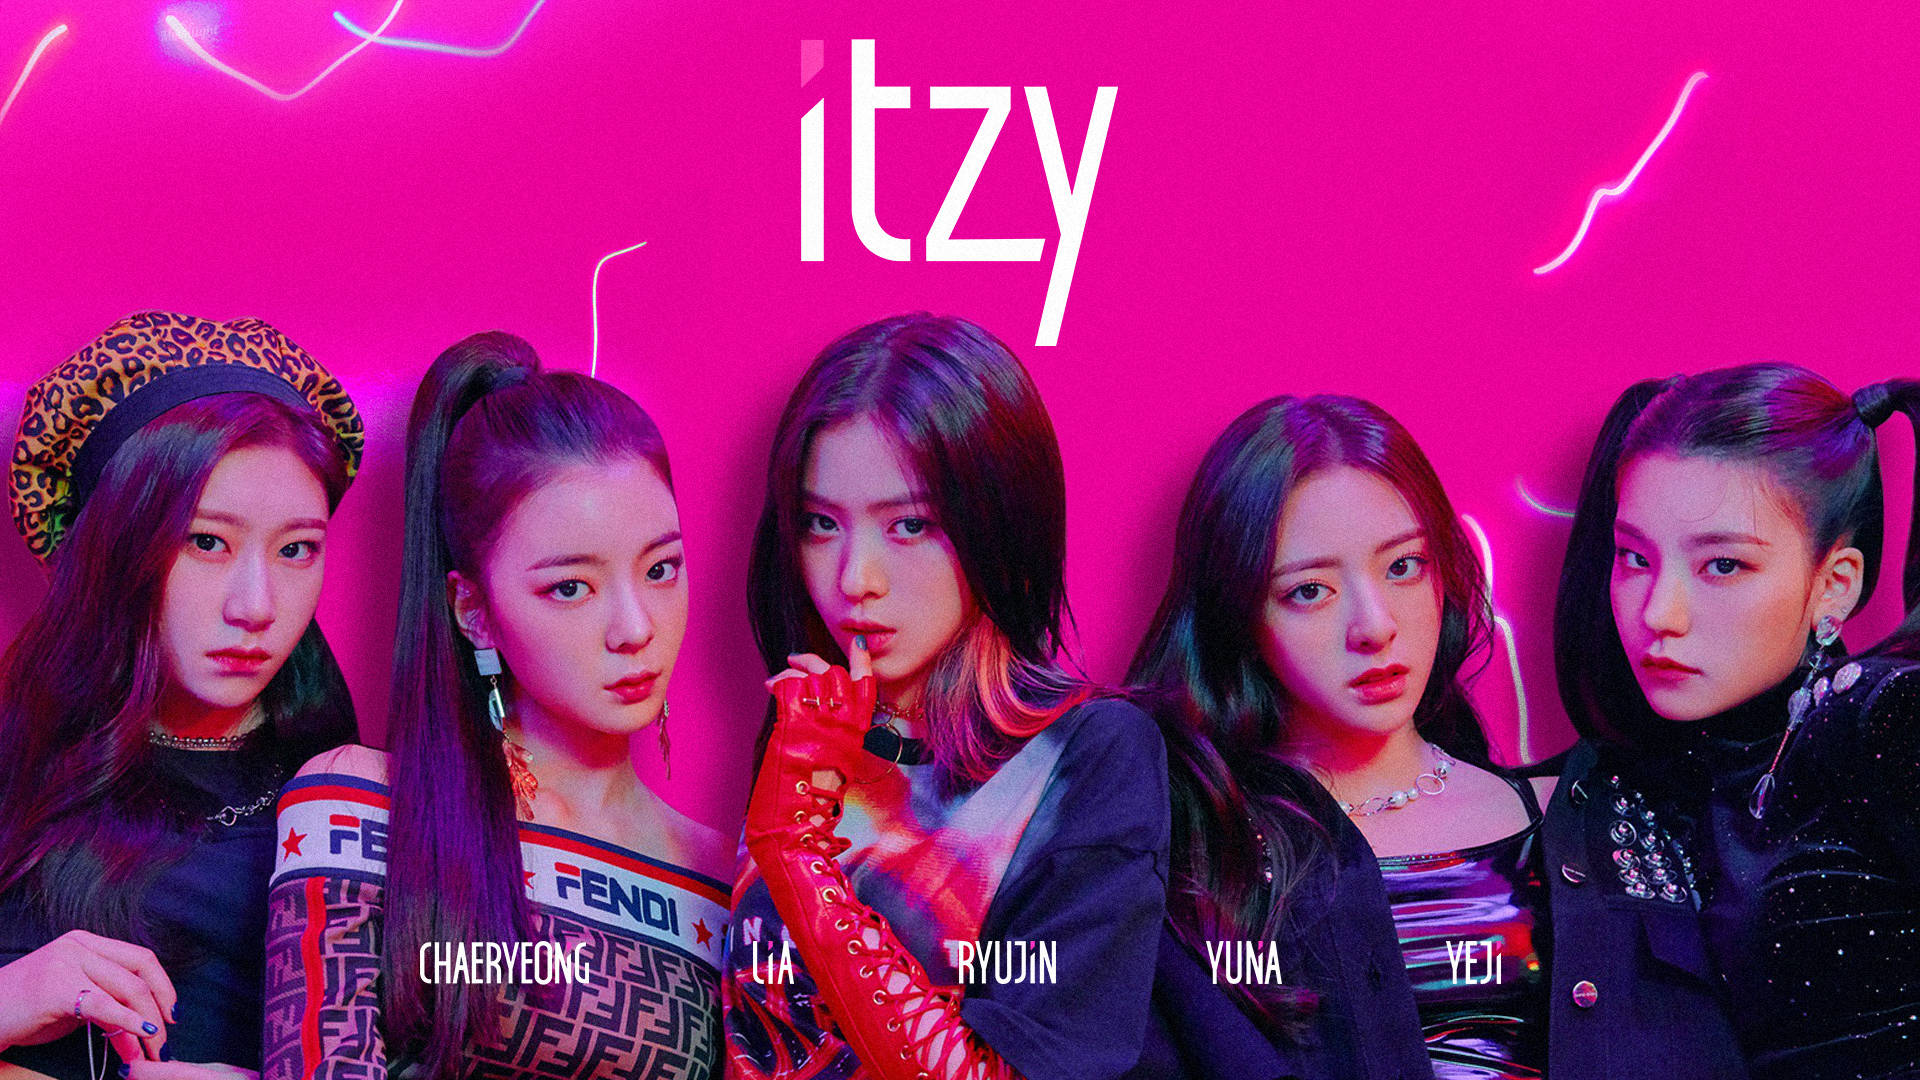 Itzy Debut Poster Background